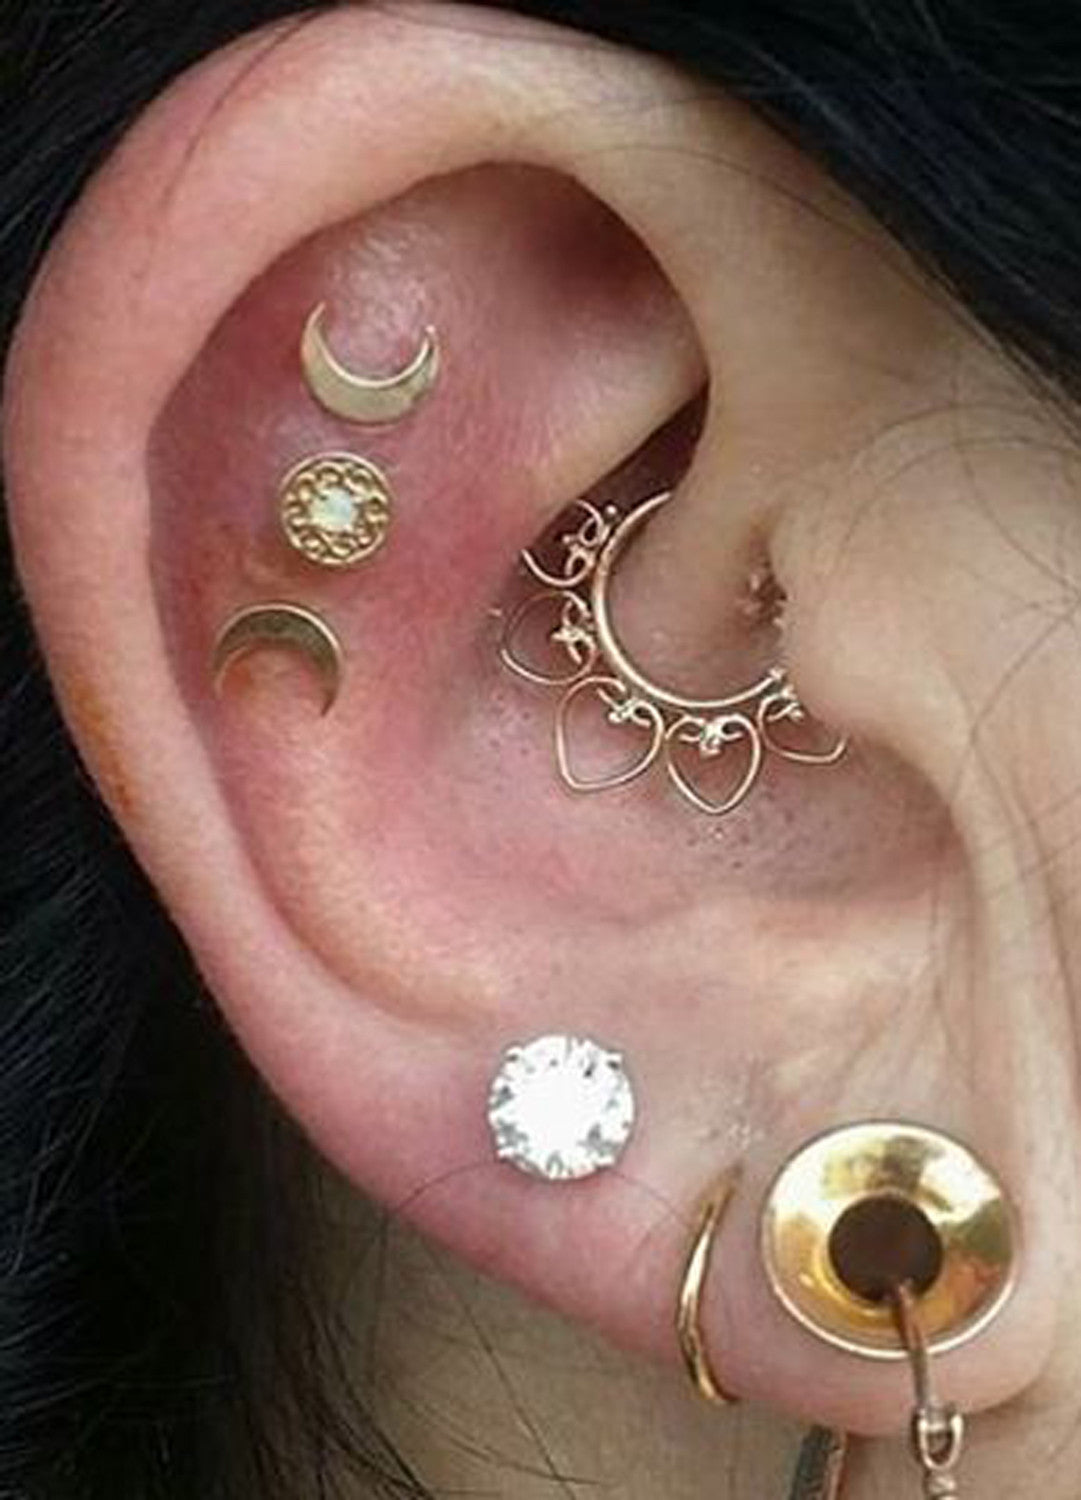 Cool Unique Ear Piercing Ideas at MyBodiArt.com - Rook Daith Hoop Ring Constellation Cartilage Moon Stars Studs Lobe 